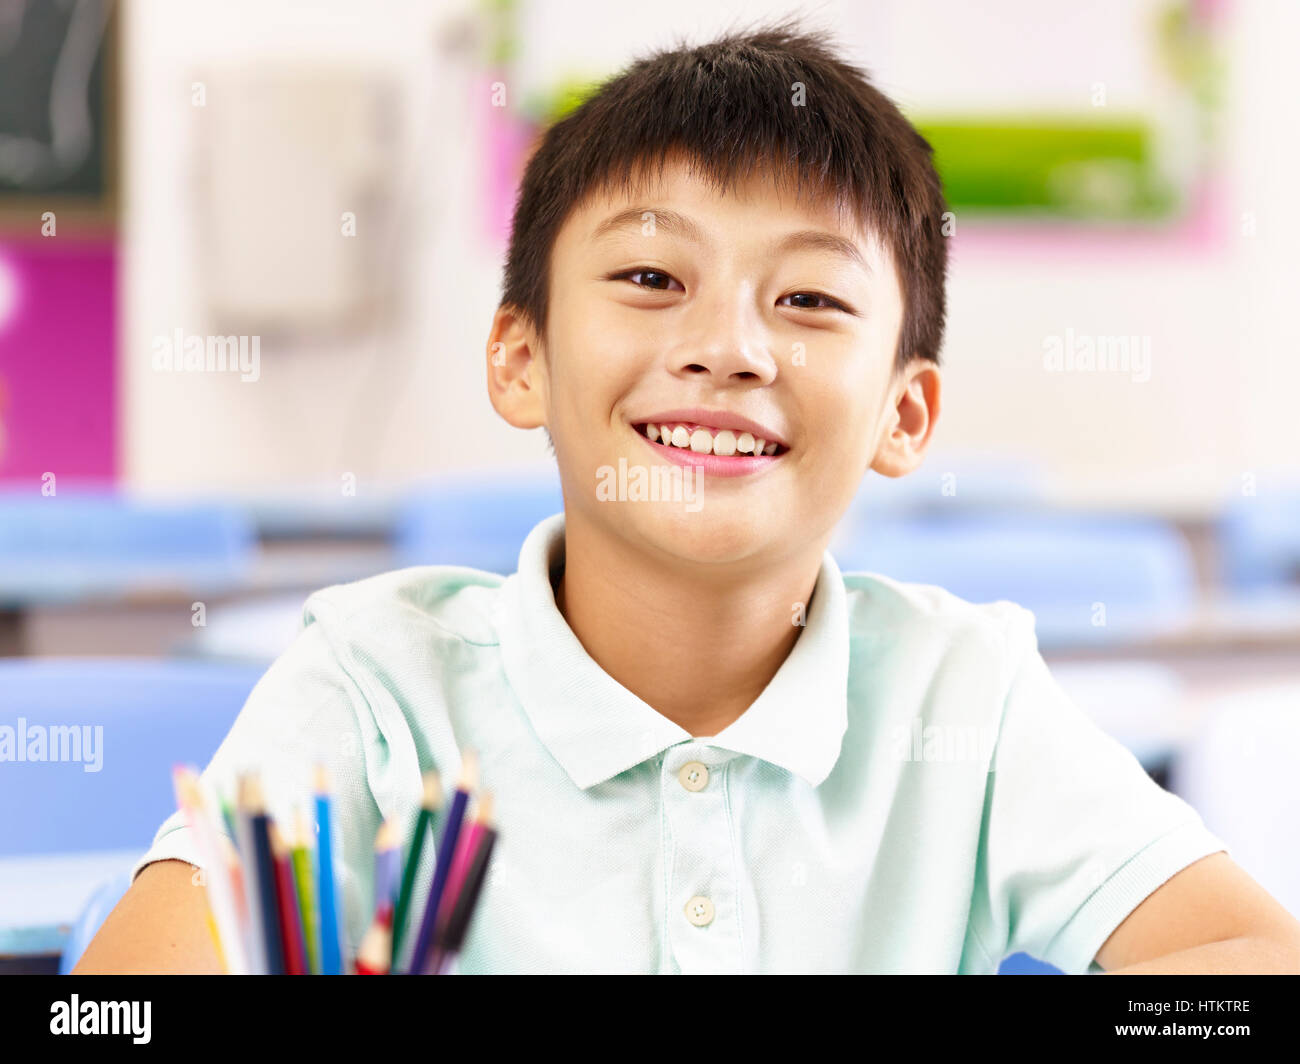 portrait-of-11-year-old-asian-elementary-schoolboy-stock-photo-alamy